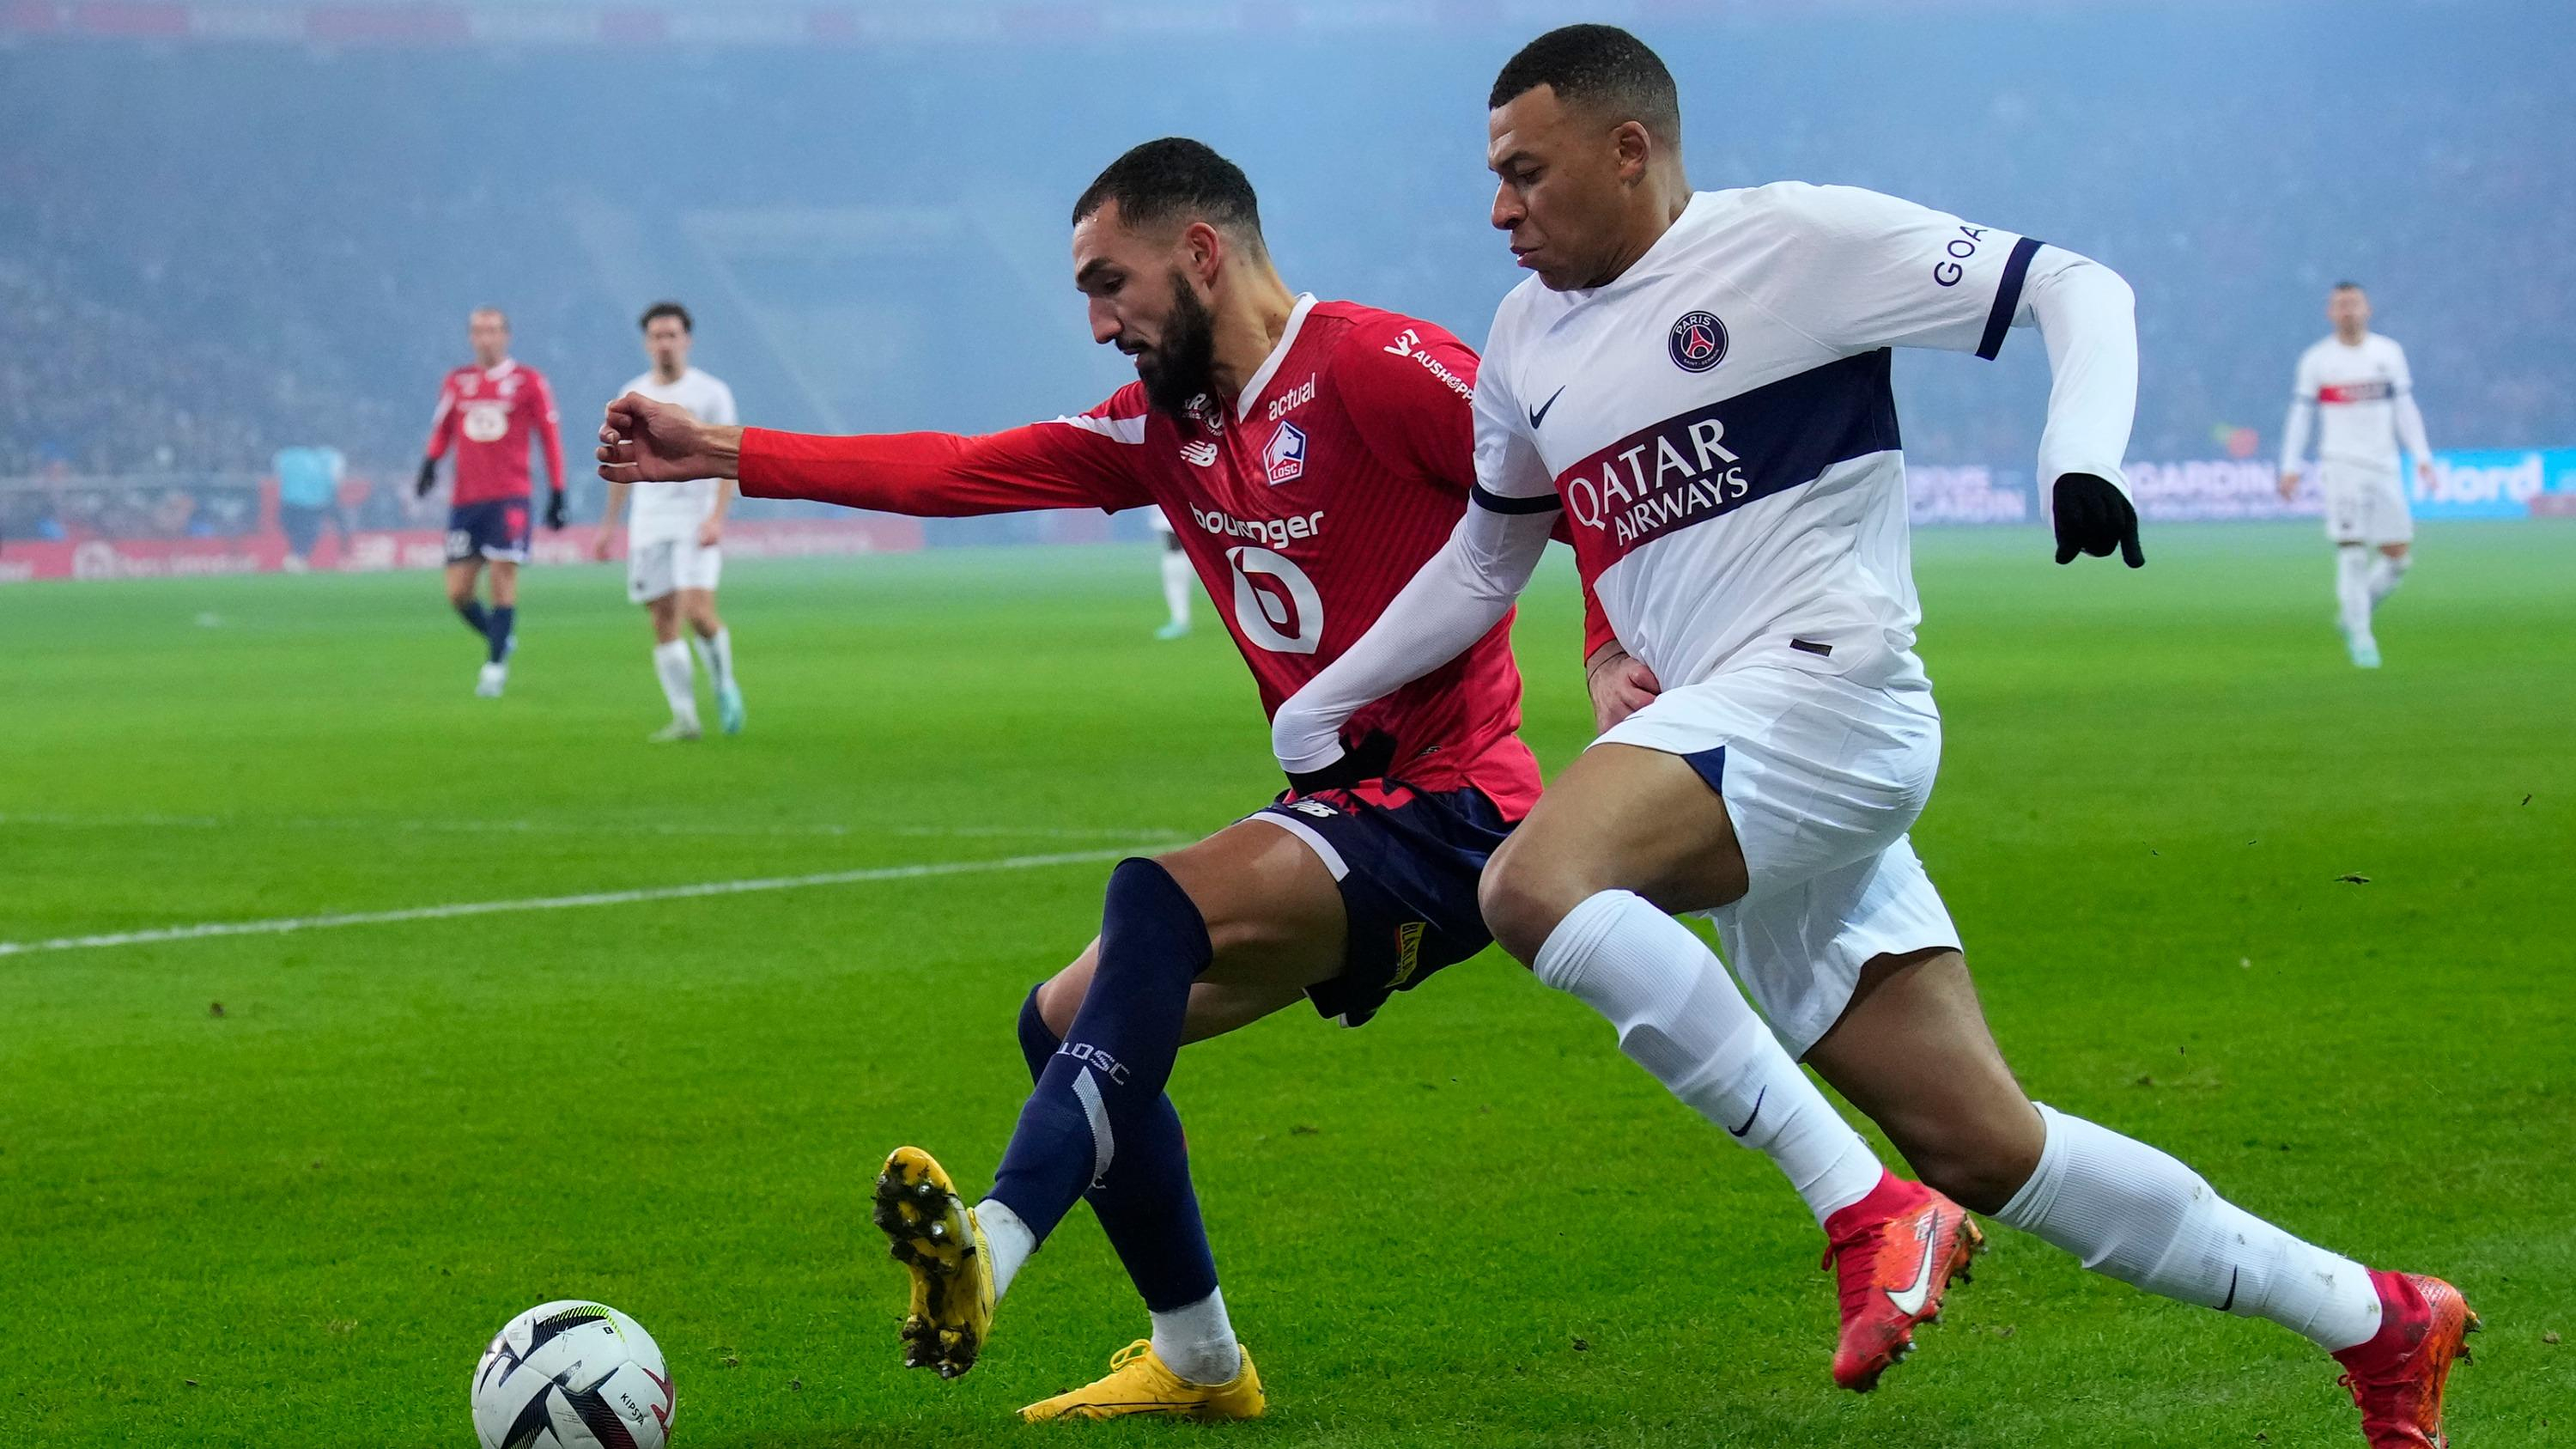 Ligue 1: at what time and on which channel to watch PSG-Lille?